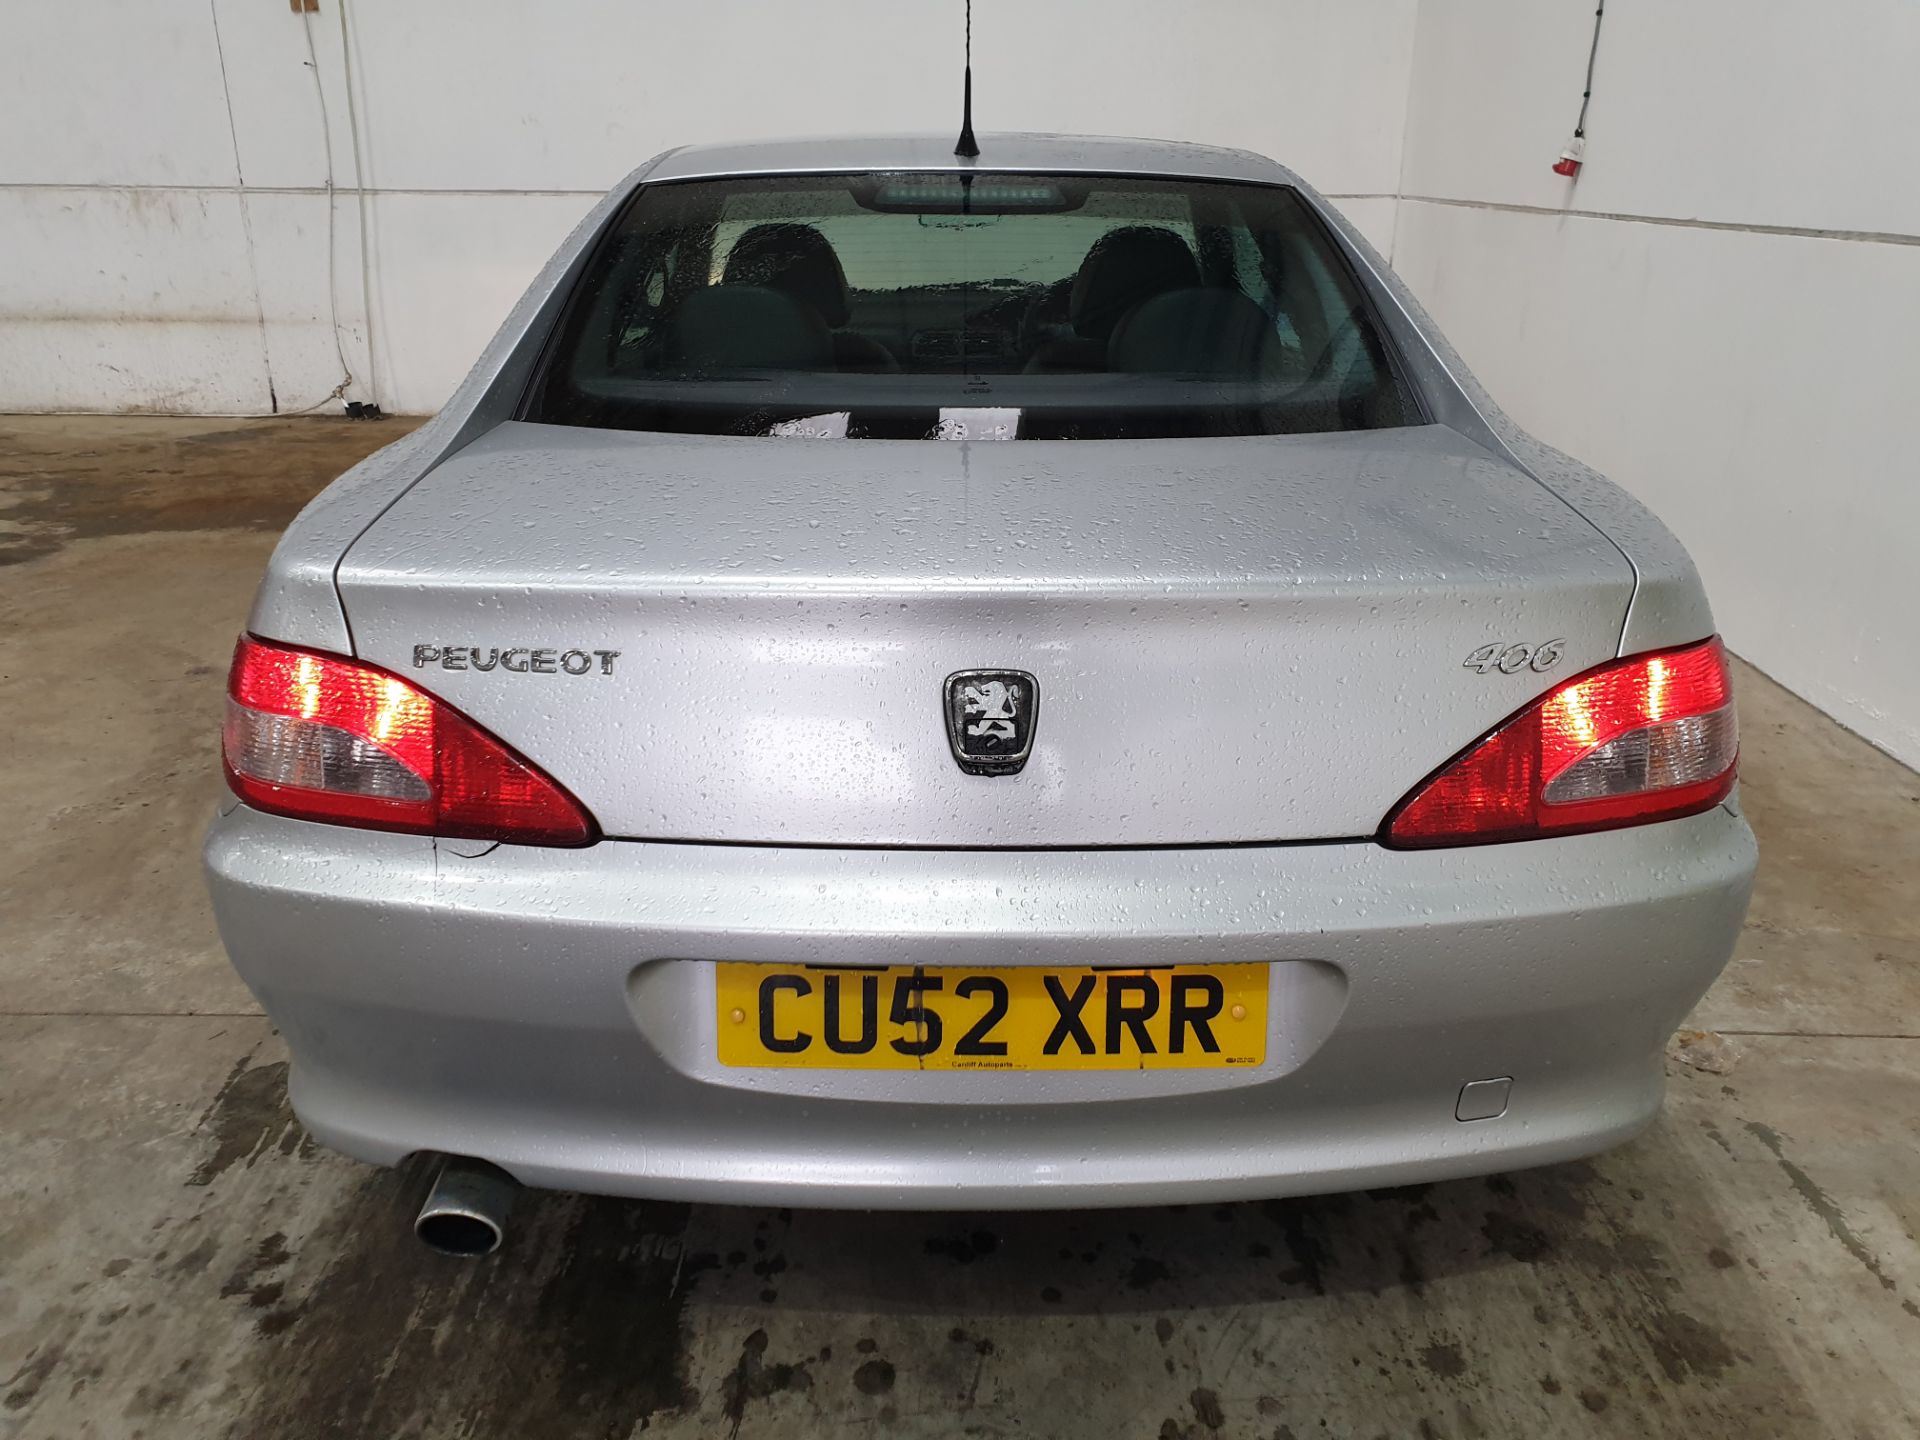 Peugeot 406 Coupe HDI, 2 owners, - Image 4 of 11